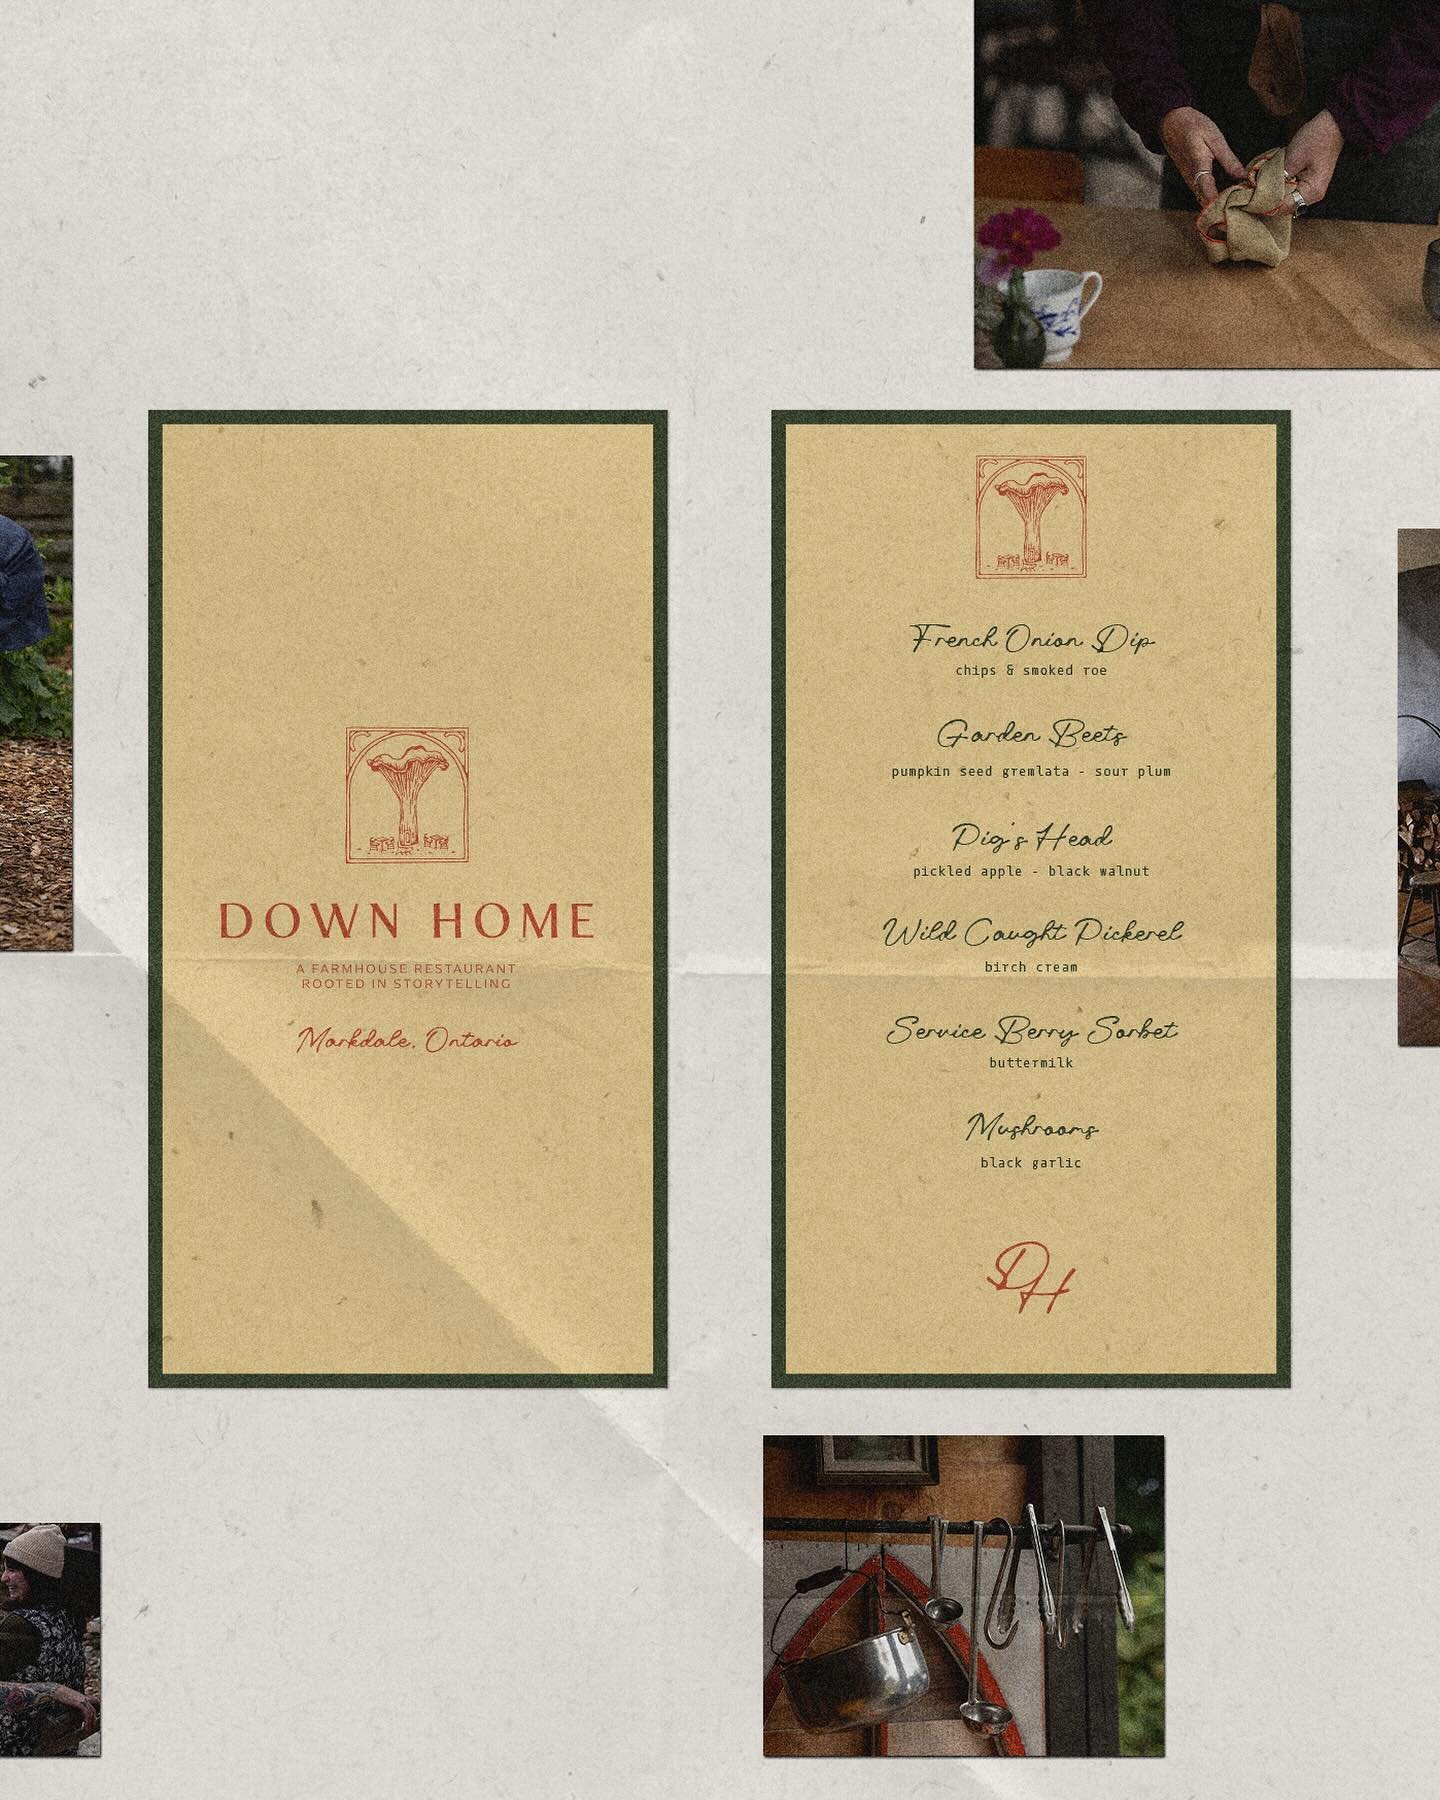 Forever delighted to be apart of my client&rsquo;s journeys, even when they pivot from where they first began. It is incredible to watch people change and have their dreams unfold before them. 

We&rsquo;ve been working on the Down Home branding for 